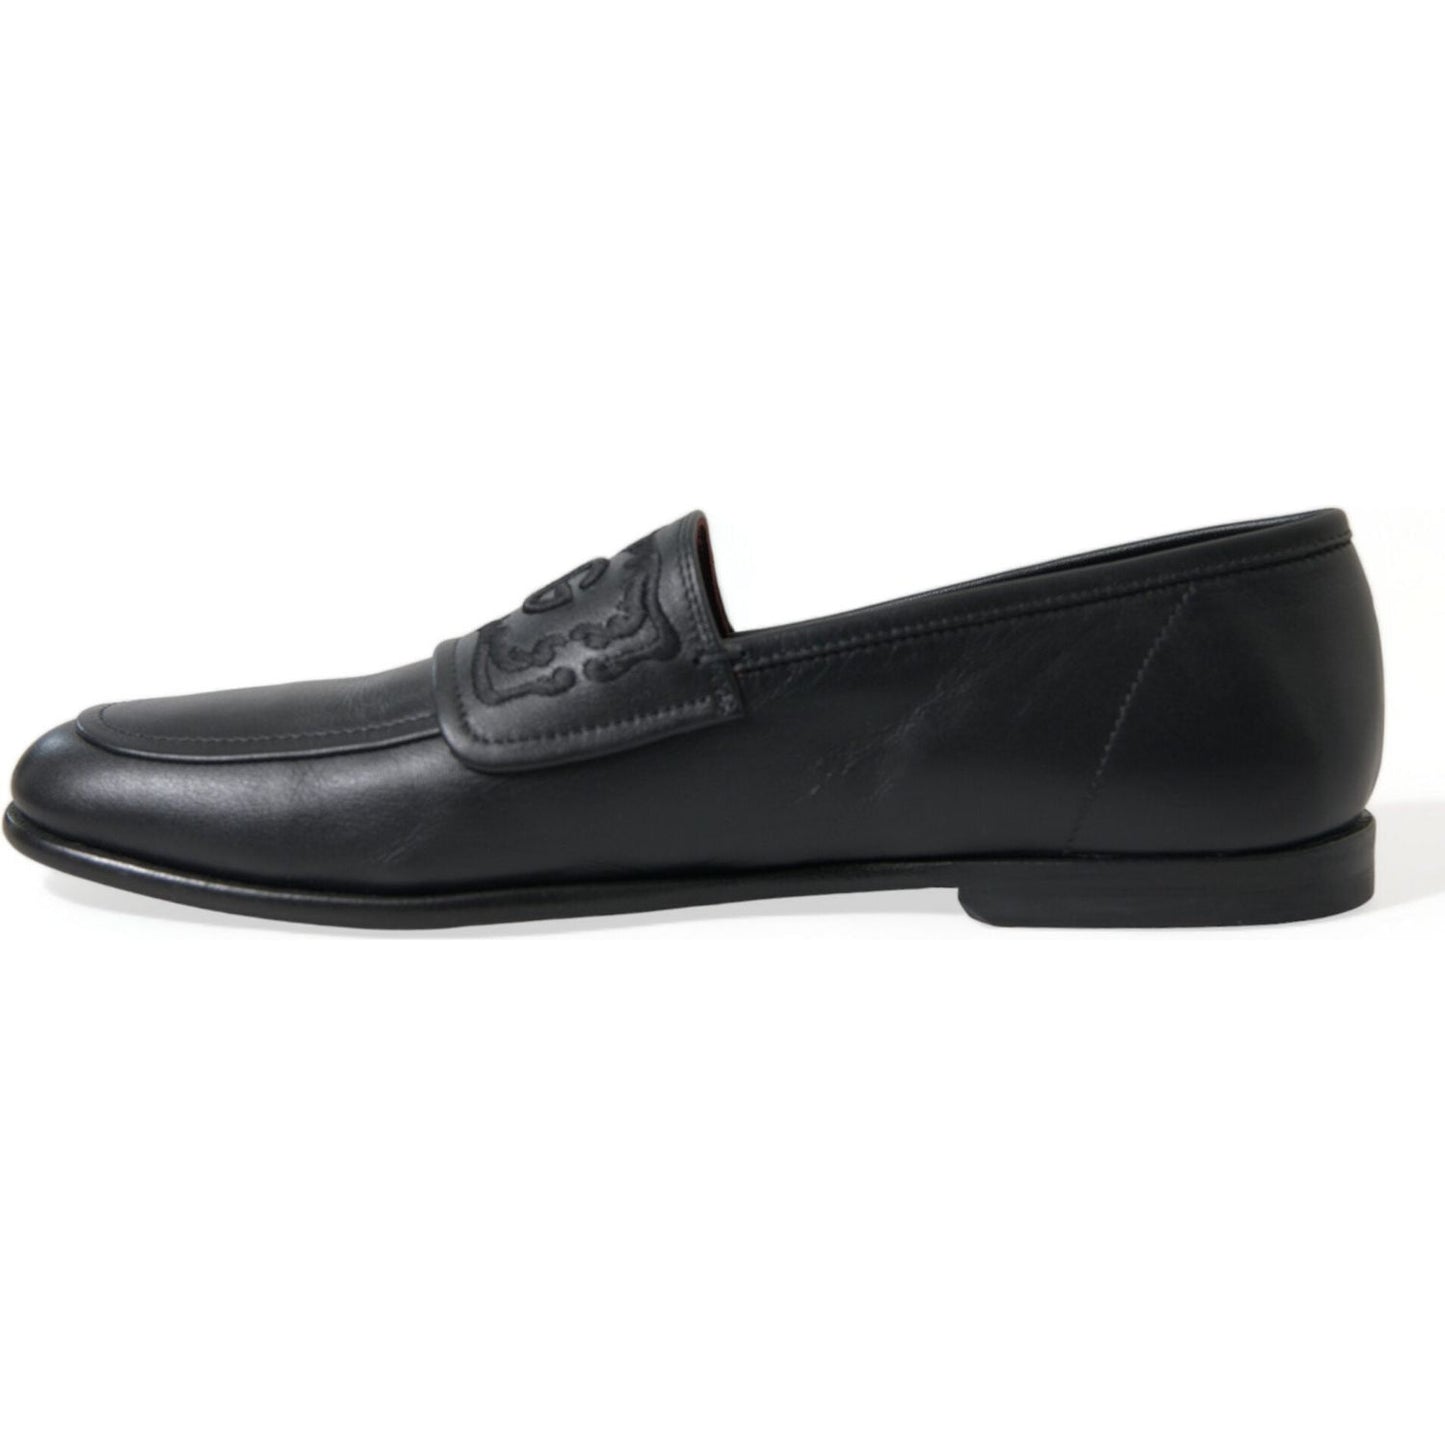 Dolce & Gabbana Elegant Black Embroidered Loafers black-leather-logo-embroidery-loafers-dress-shoes